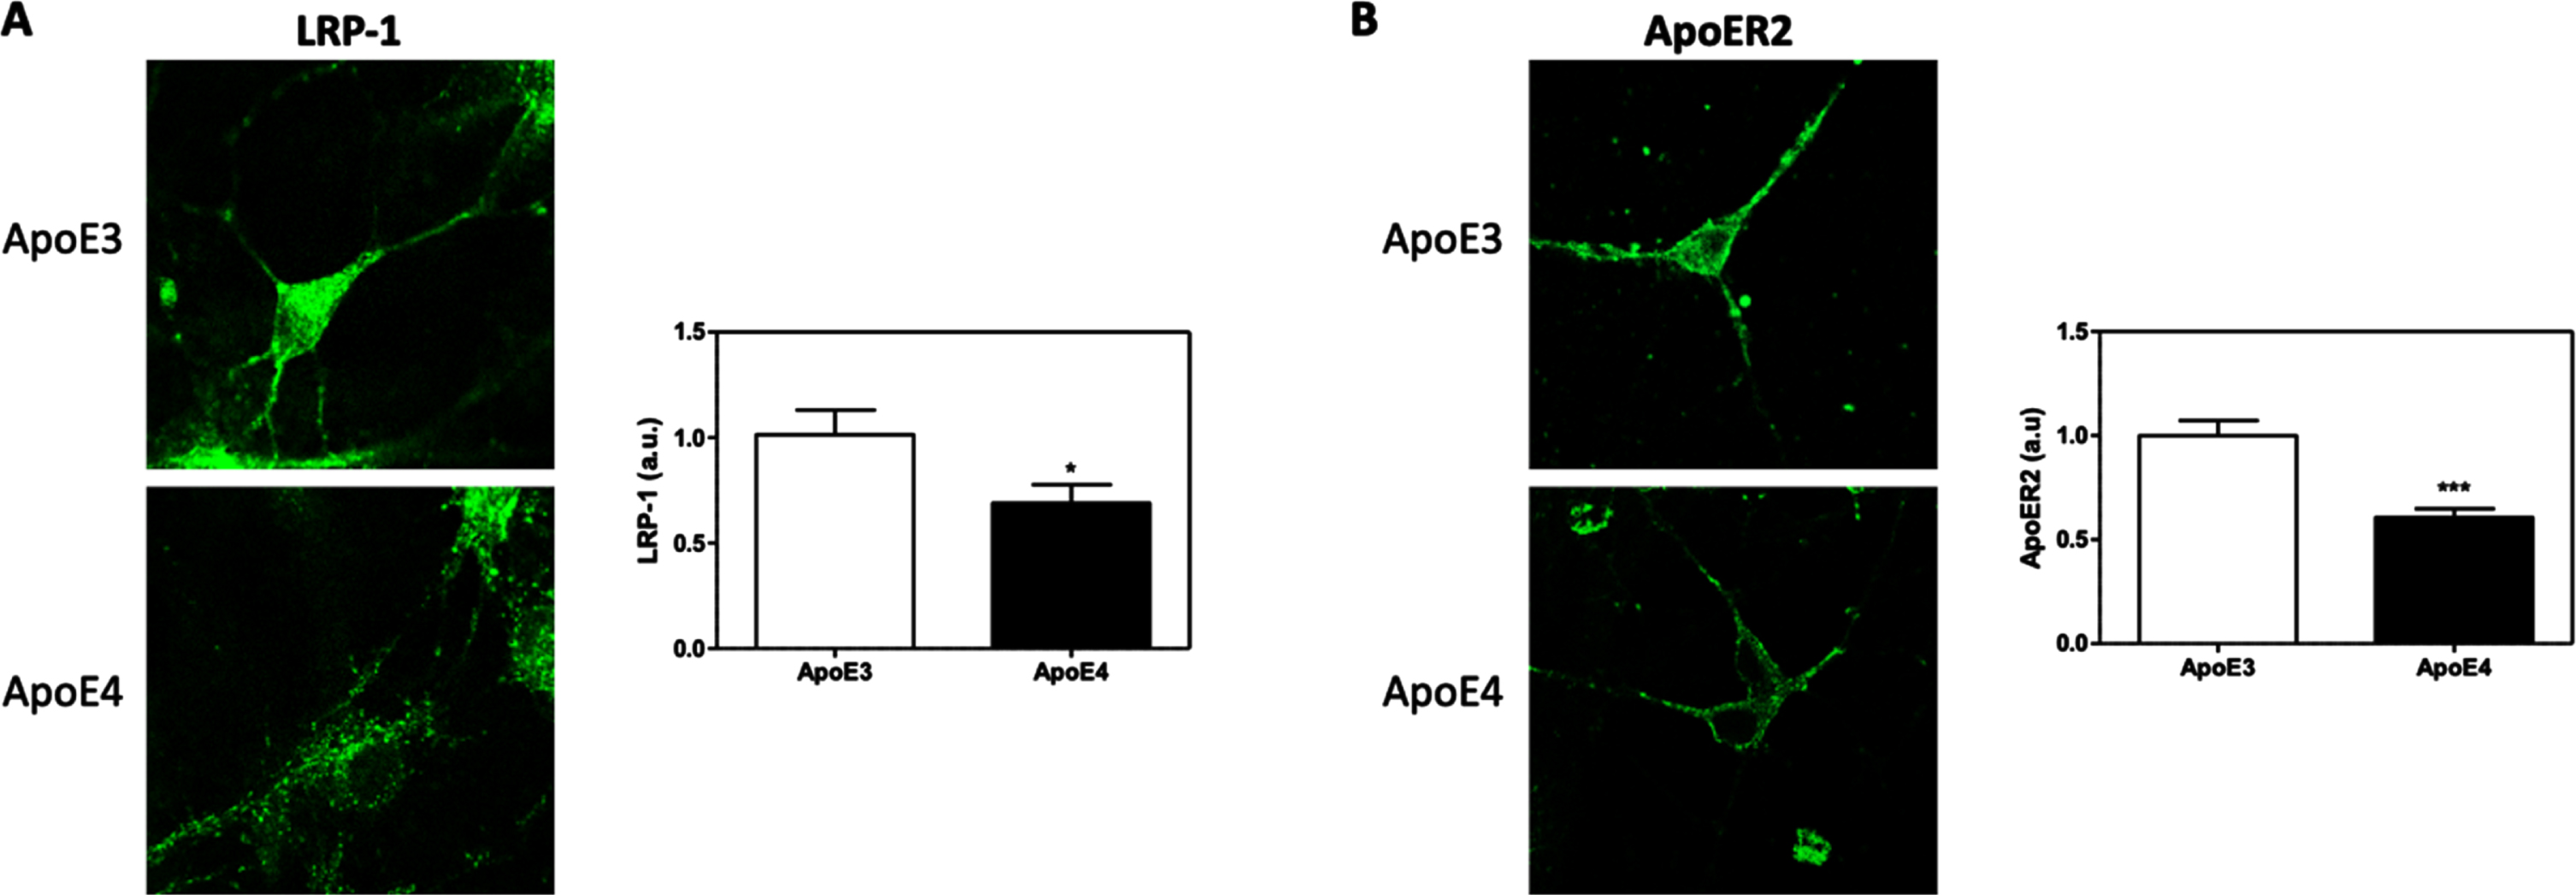 The effects of APOE genotypes on the total levels of APOER2 and LRP1 in APOE3 and APOE4 primary neurons. APOE3 and APOE4 primary neurons were stained for LRP1 (A) and APOER2 (B). Representative images are shown on the left, whereas quantifications of the results are shown on the right. The results show a significant downregulation, in APOE4 neurons, of the levels of both LRP1 (APOE3 = 1.00±0.11, APOE4 = 0.68±0.086, p < 0.05, N = 53–58 cells from 4 different preparations) and APOER2 (APOE3 = 1.00±0.071, APOE4 = 0.60±0.040, p < 0.0001, N = 86–101 cells from 6 different preparations). The scalebar on the images indicate 10μm. *indicates p < 0.05, ***indicates<0.001.